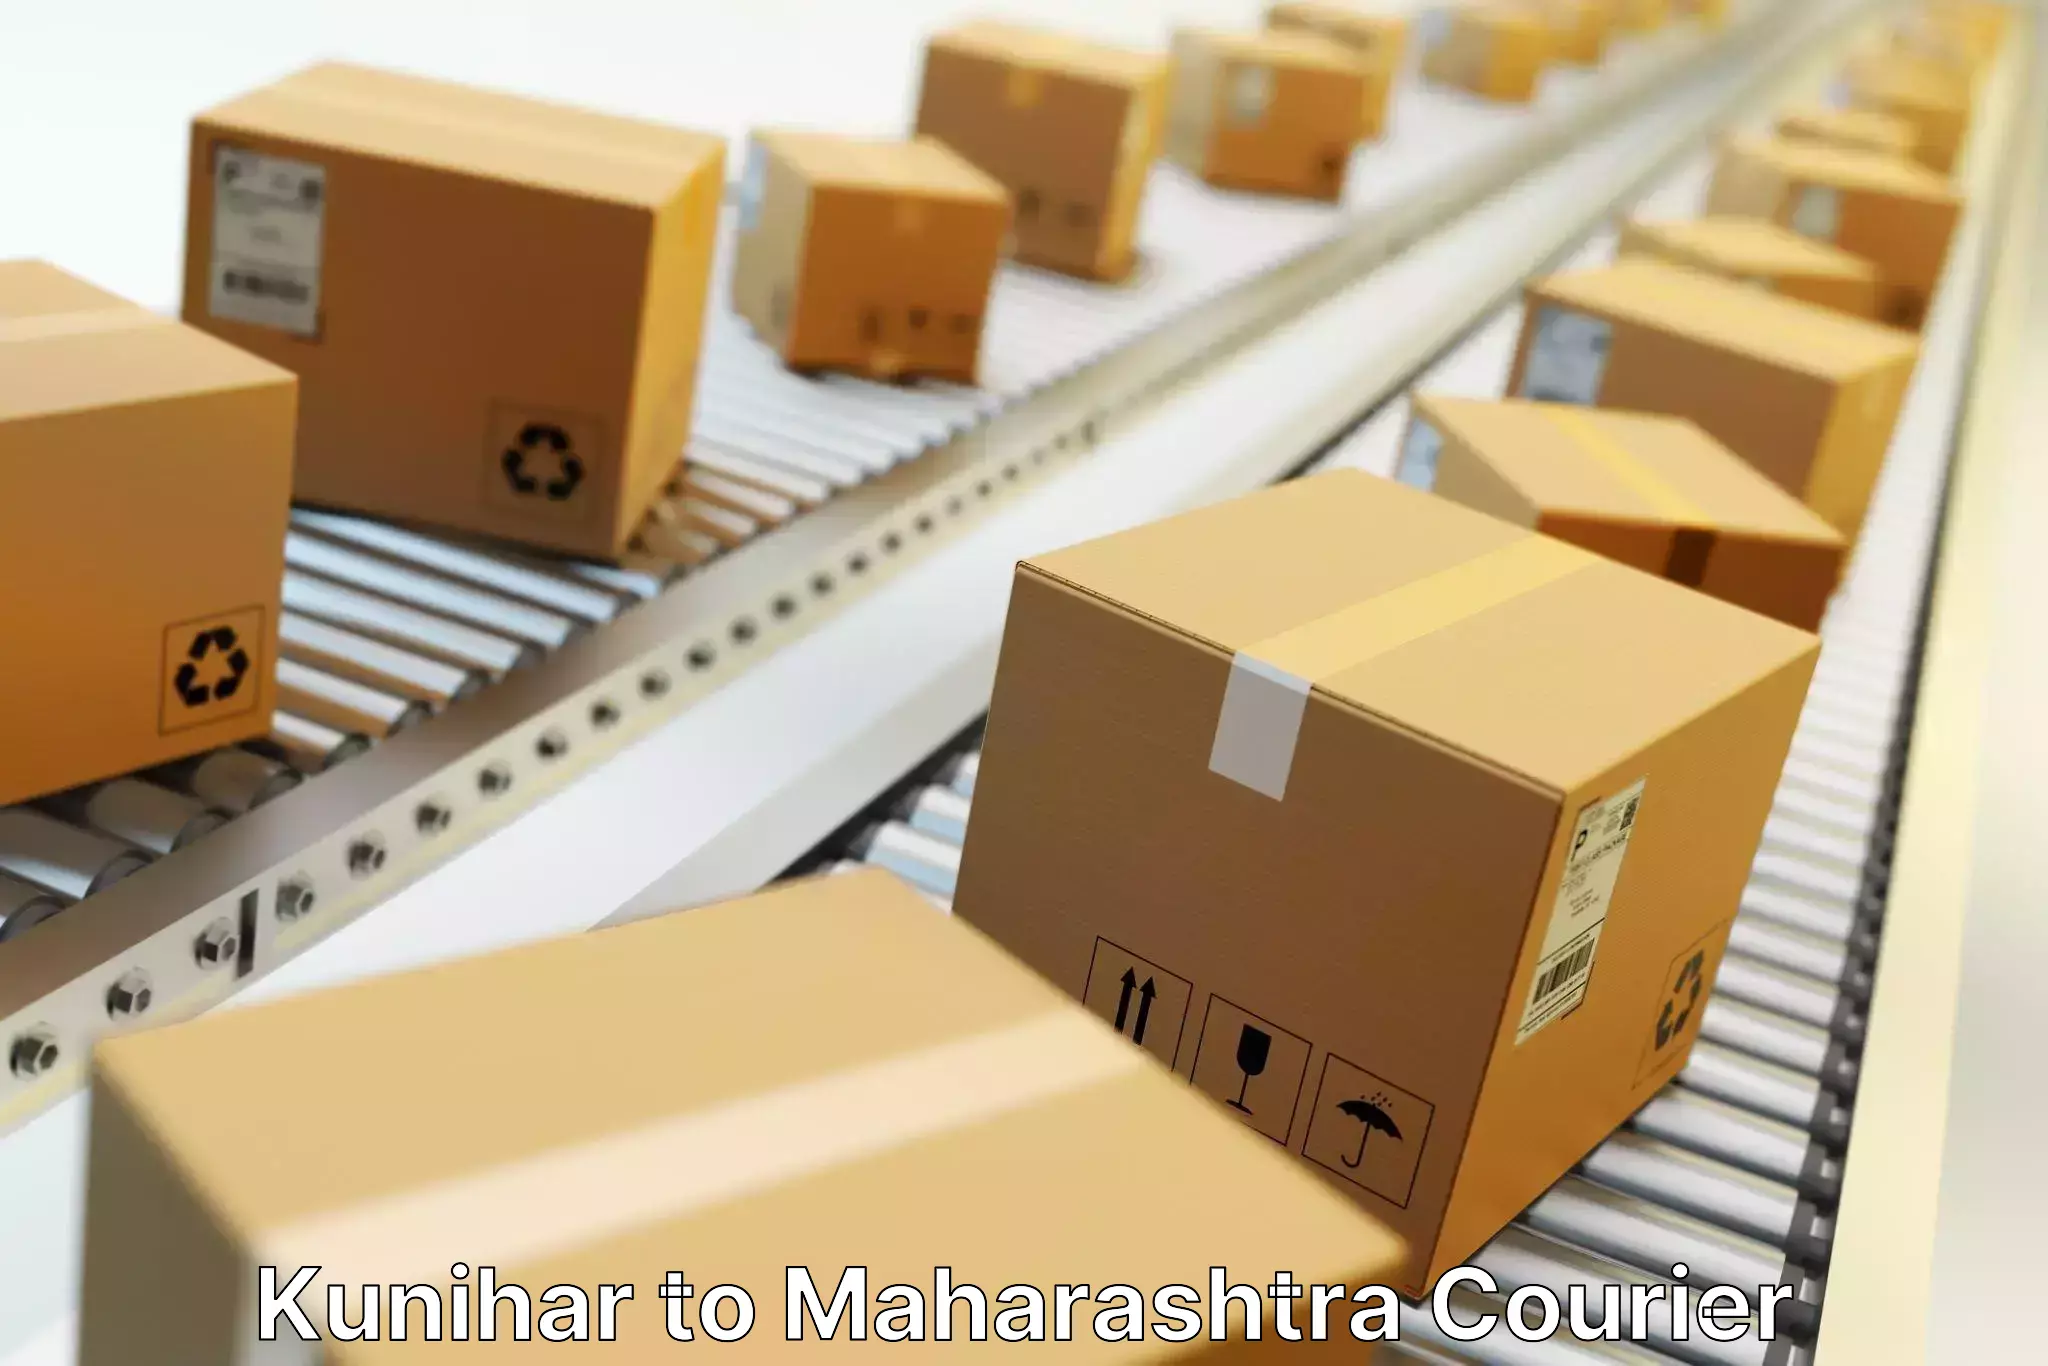 Parcel delivery automation Kunihar to Lonar